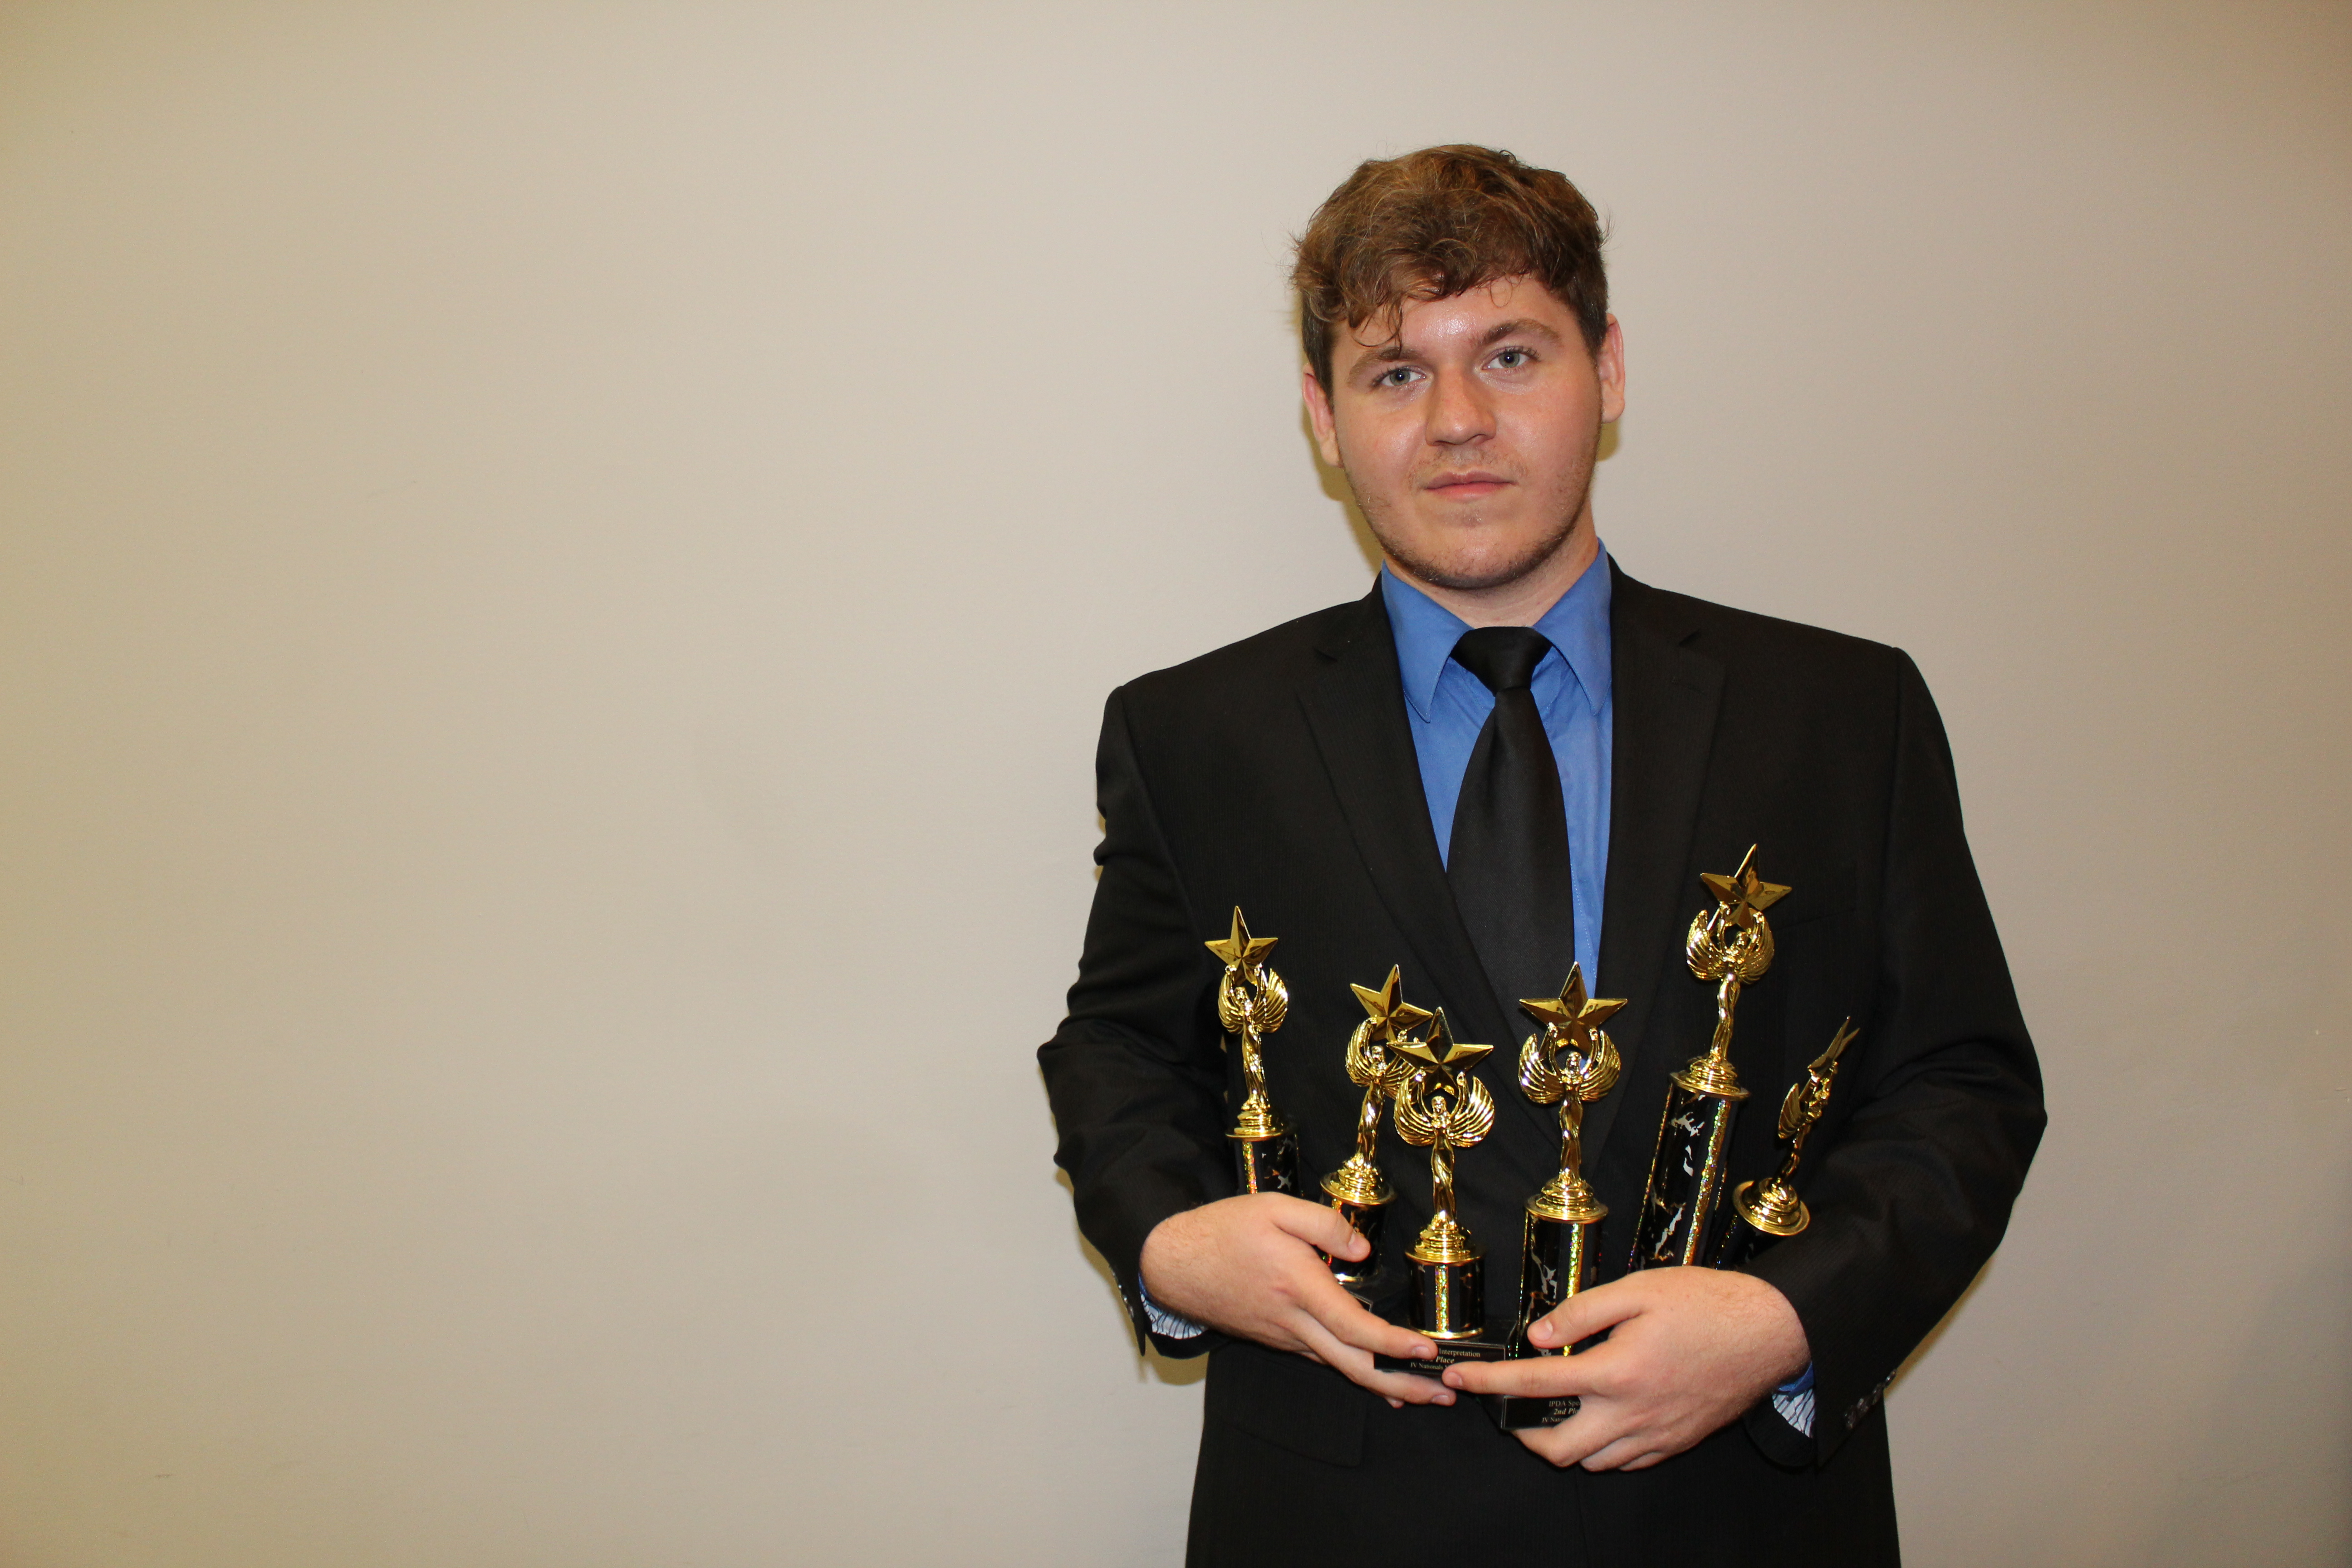 Male student holding trophies